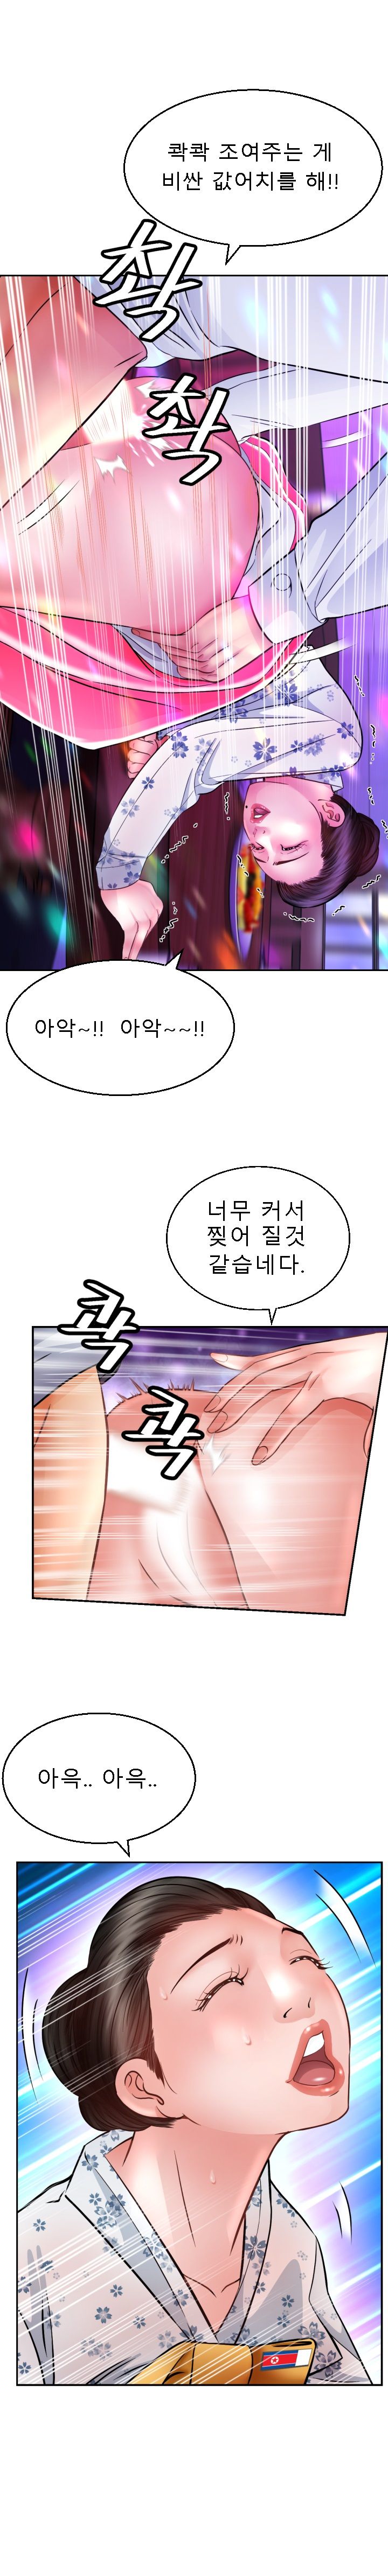 Restaurant Pyongyang Raw - Chapter 2 Page 9